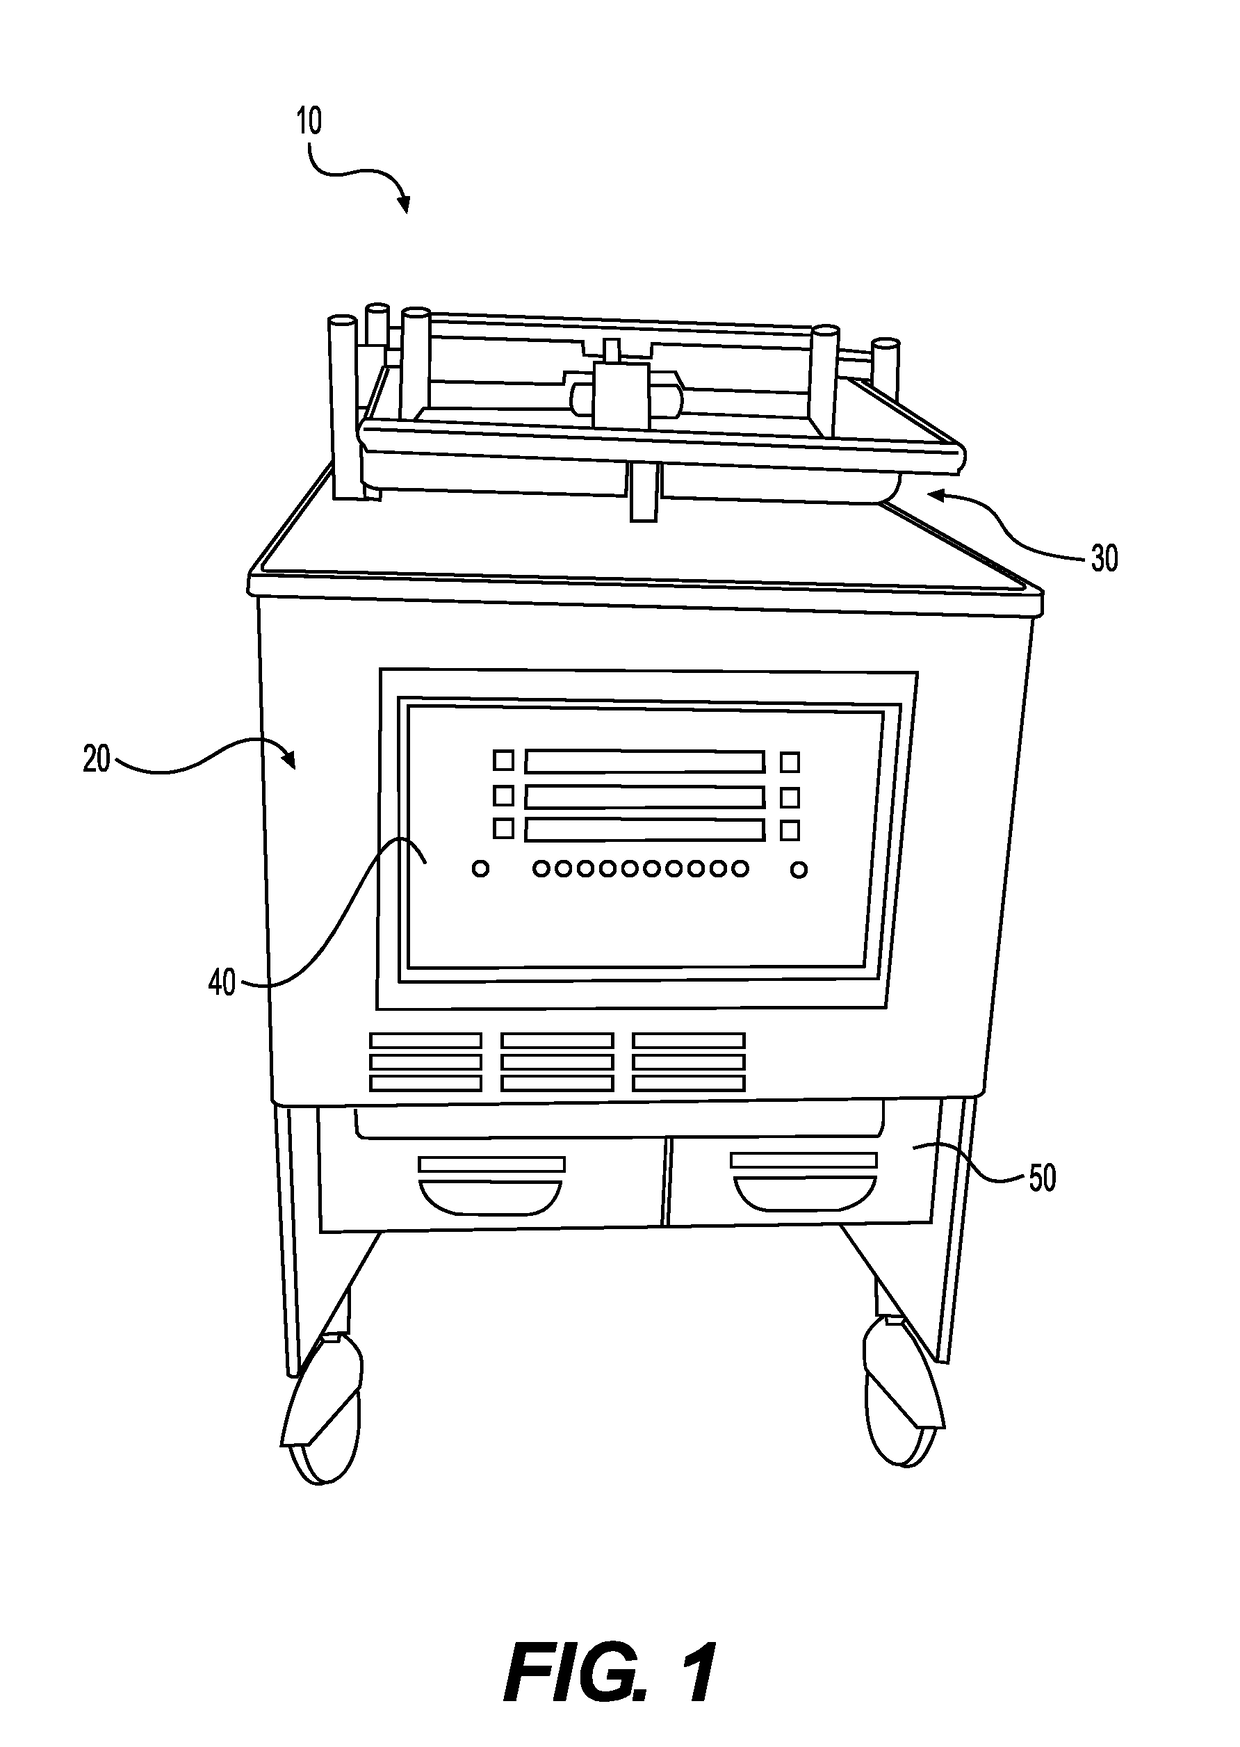 Pressure assist feature for pressure fryer